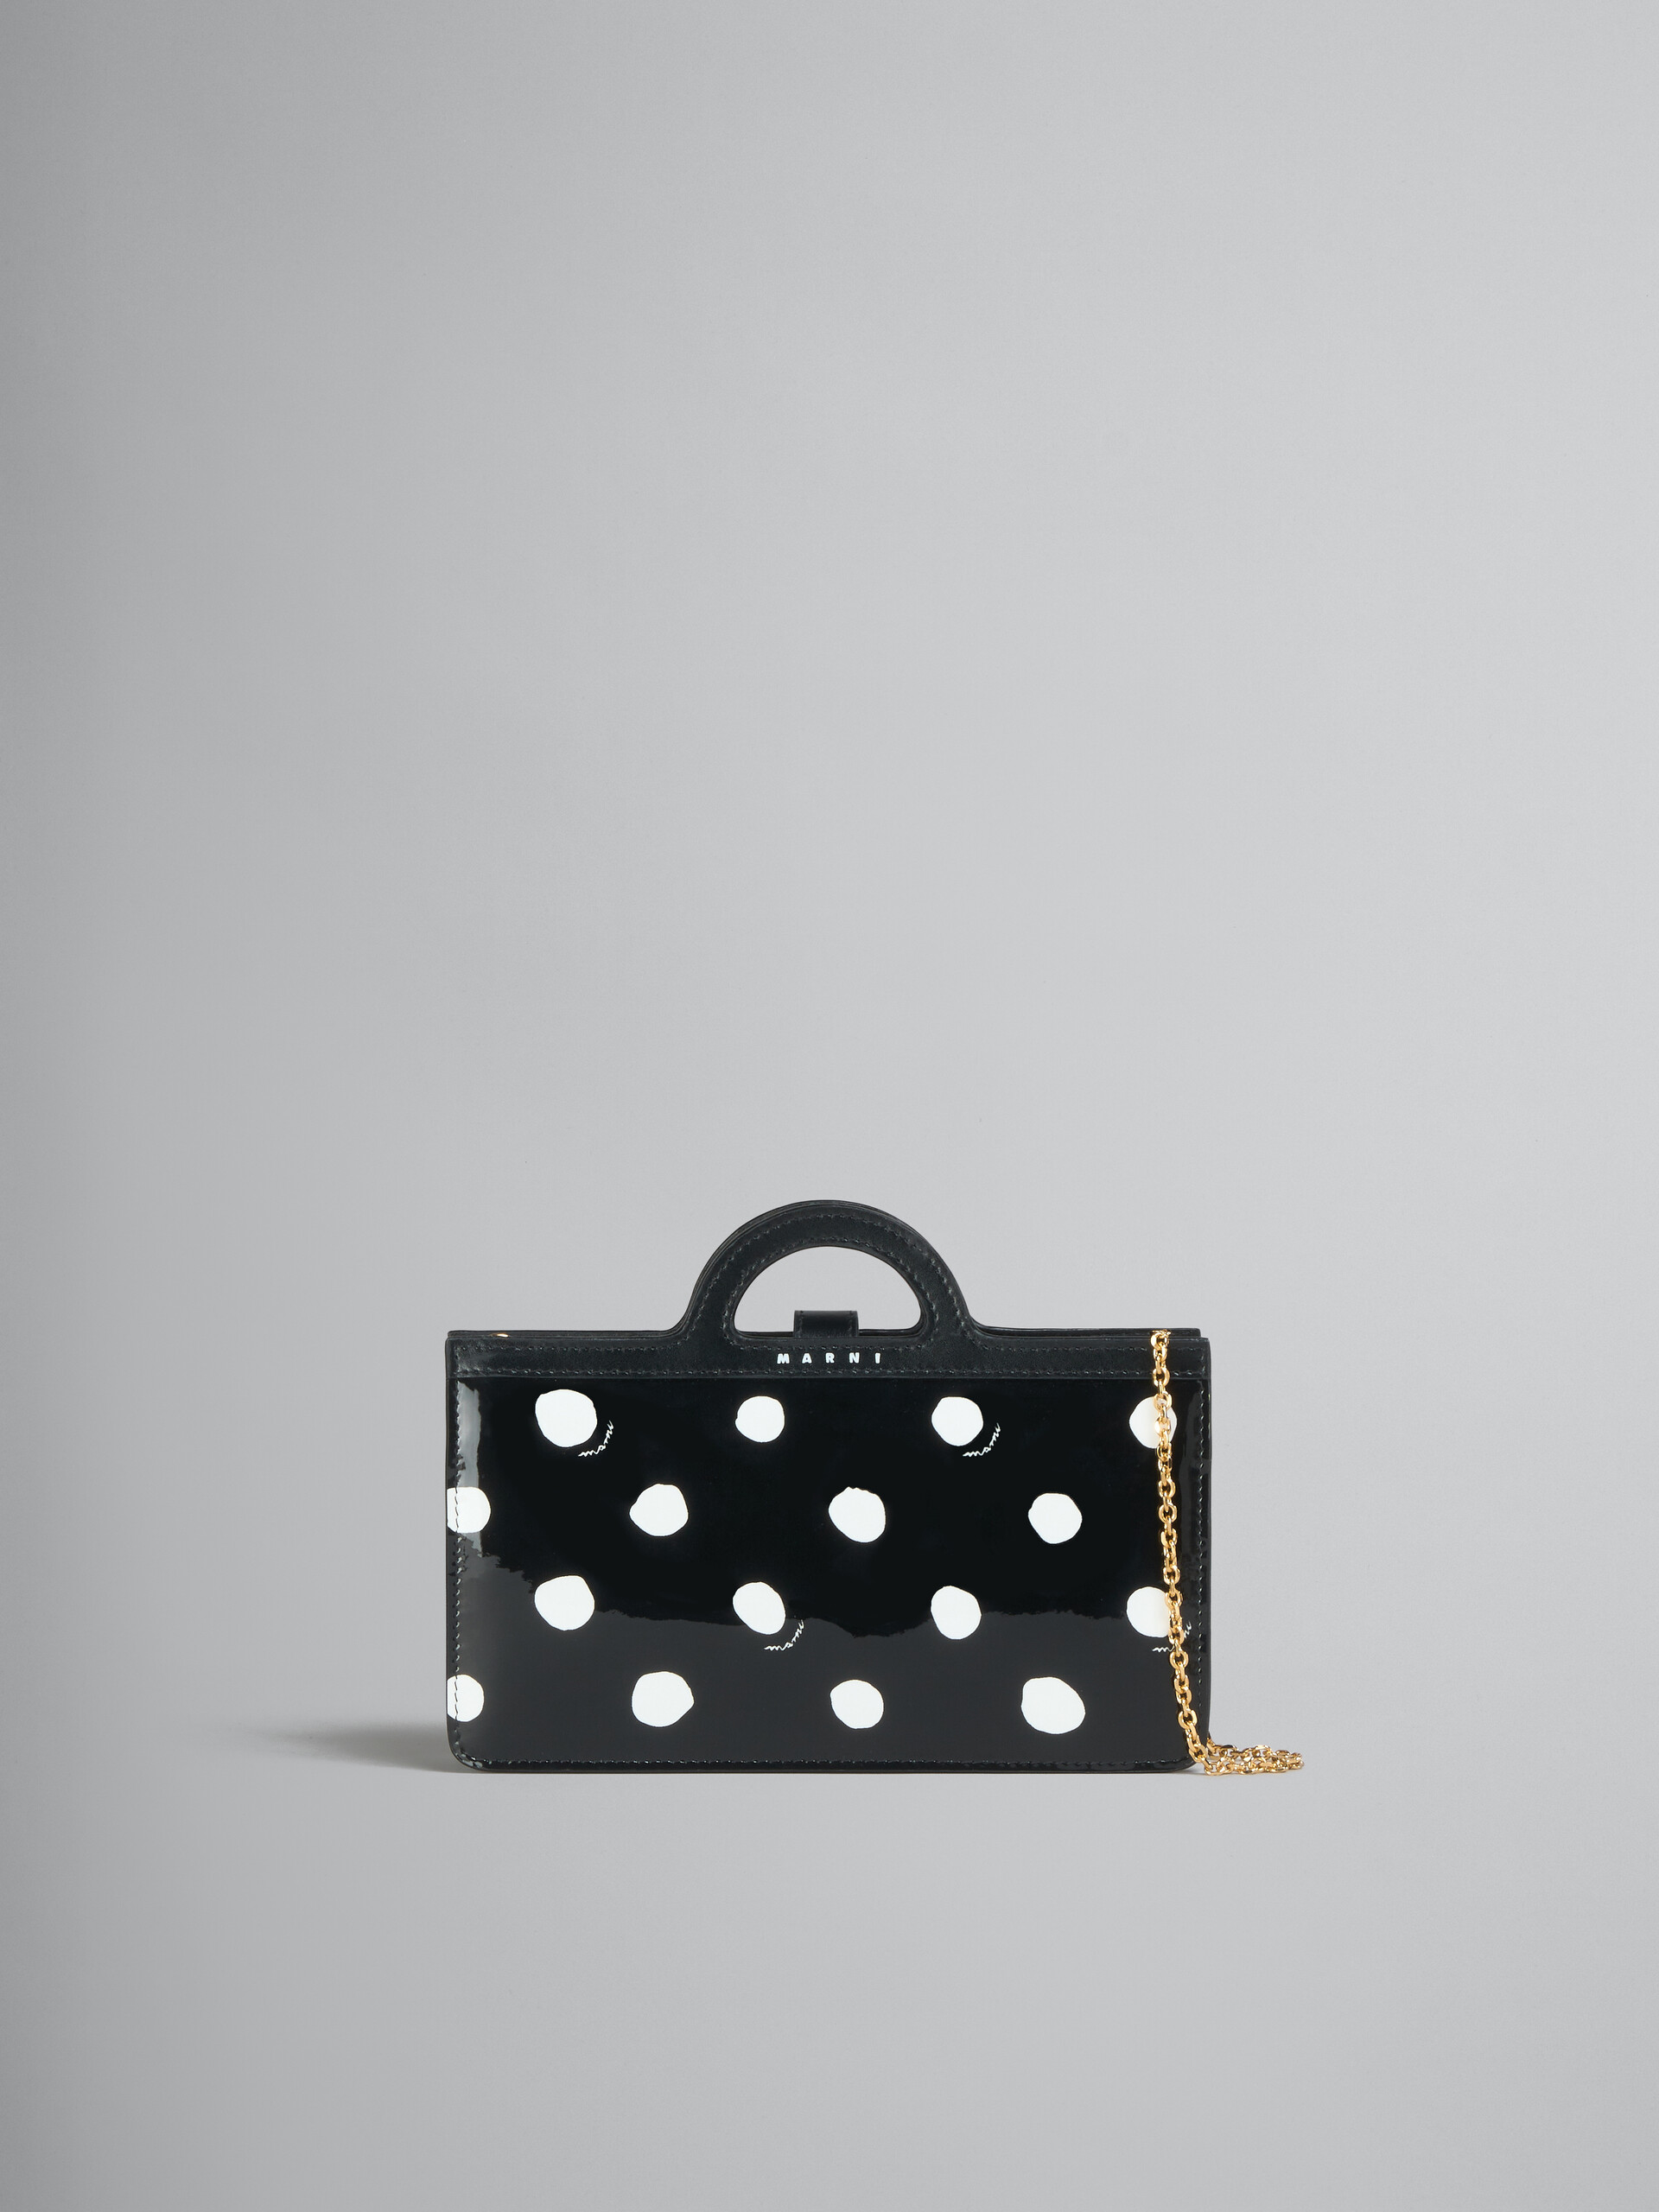 Black and white polka-dot patent leather Tropicalia long wallet with chain - Wallets - Image 1